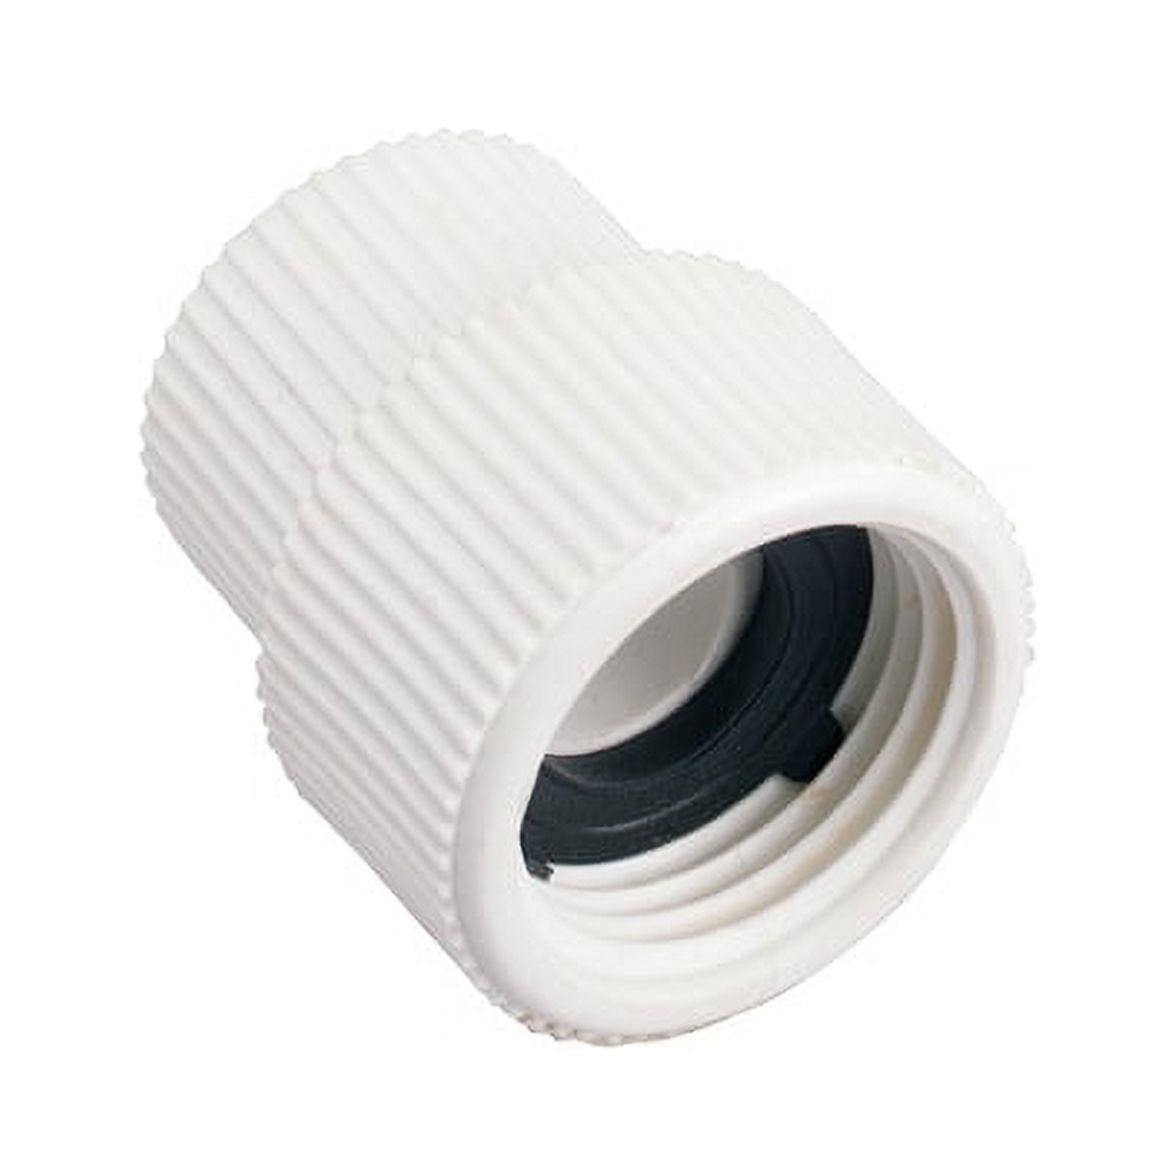 Orbit Female Thread 1/2 Pipe x Hose - PVC Swivel Hoses to Pipe Fitting  Adapter 